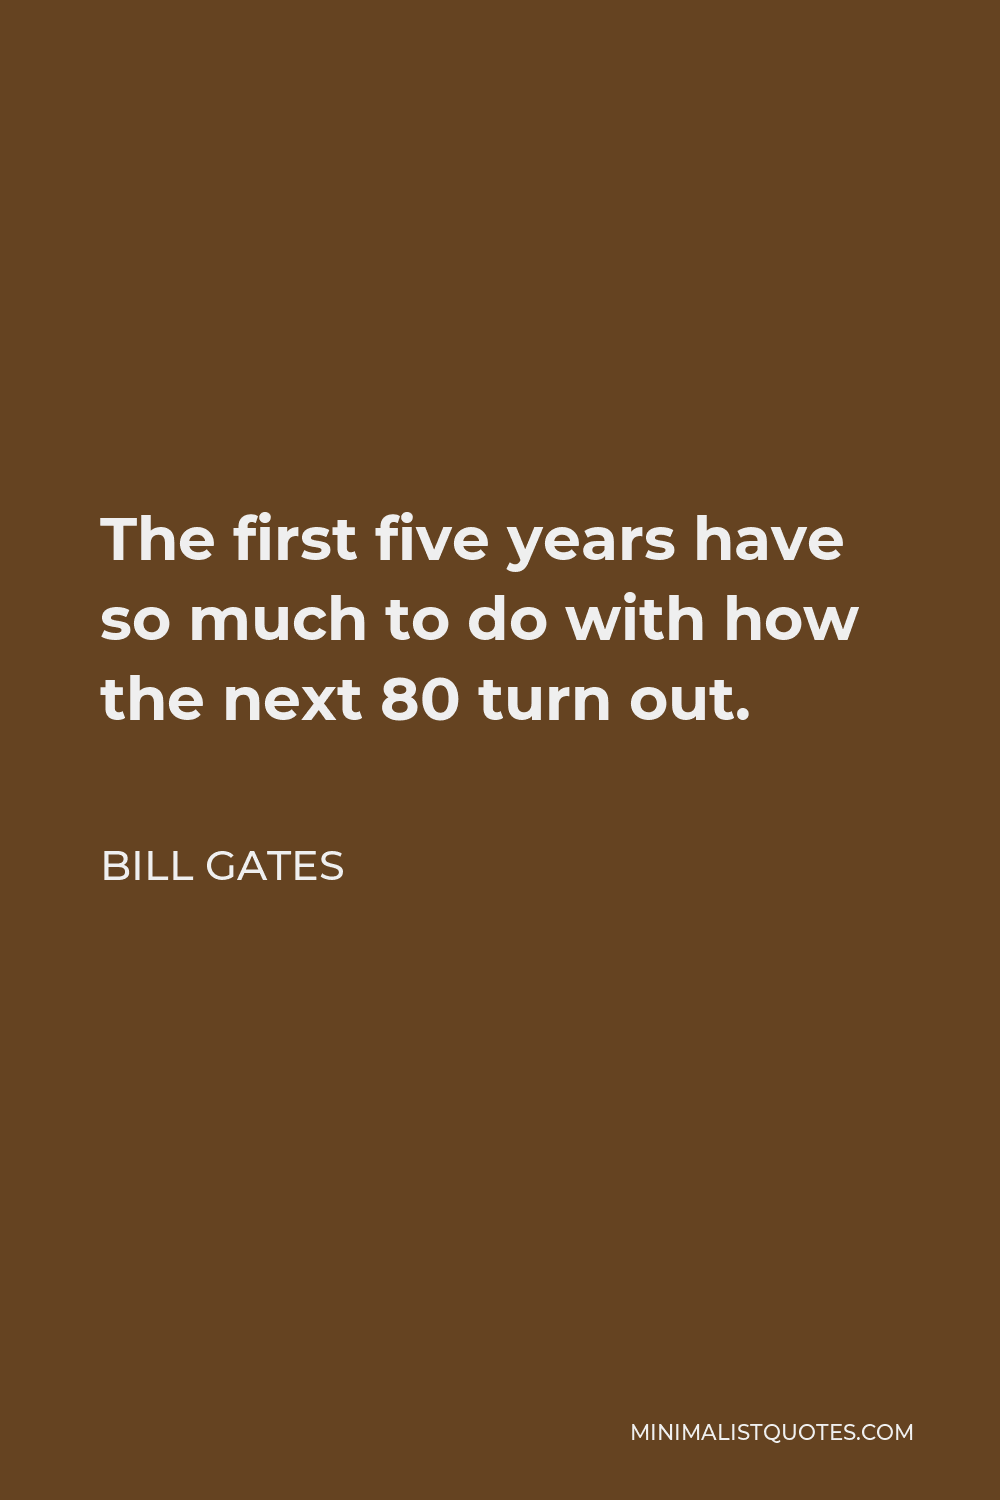 Bill Gates Quote - The first five years have so much to do with how the next 80 turn out.